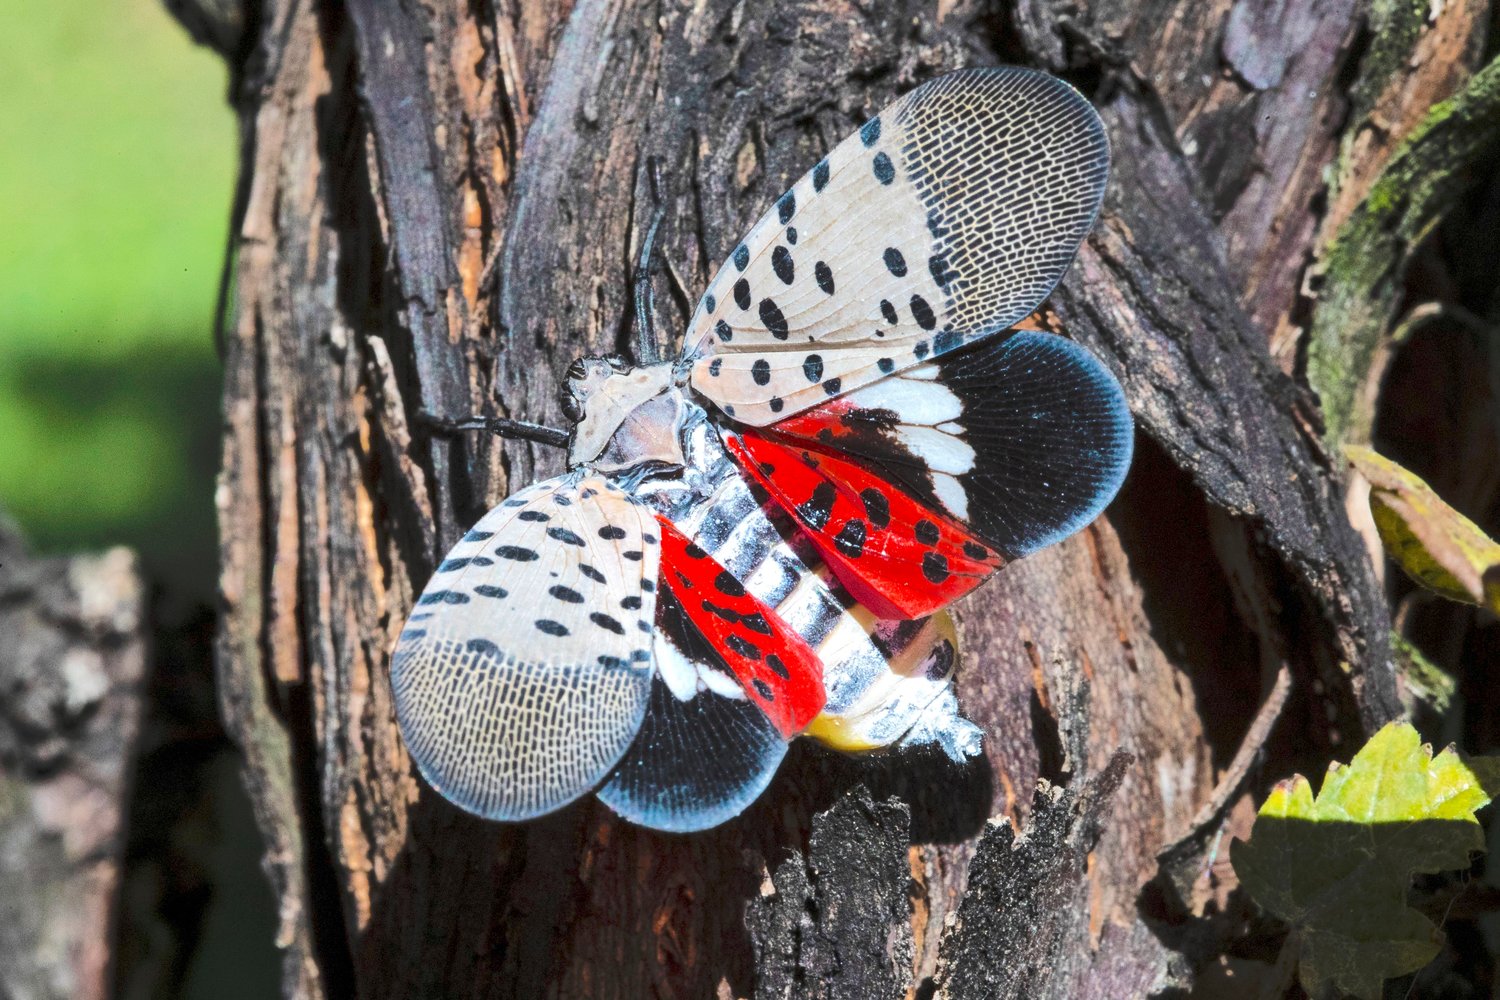 A spotted lanternfly at a vineyard in Kutztown, Pennsylvania. Spotted lanternfly along with Asian jumping worms are the latest threats in New York.